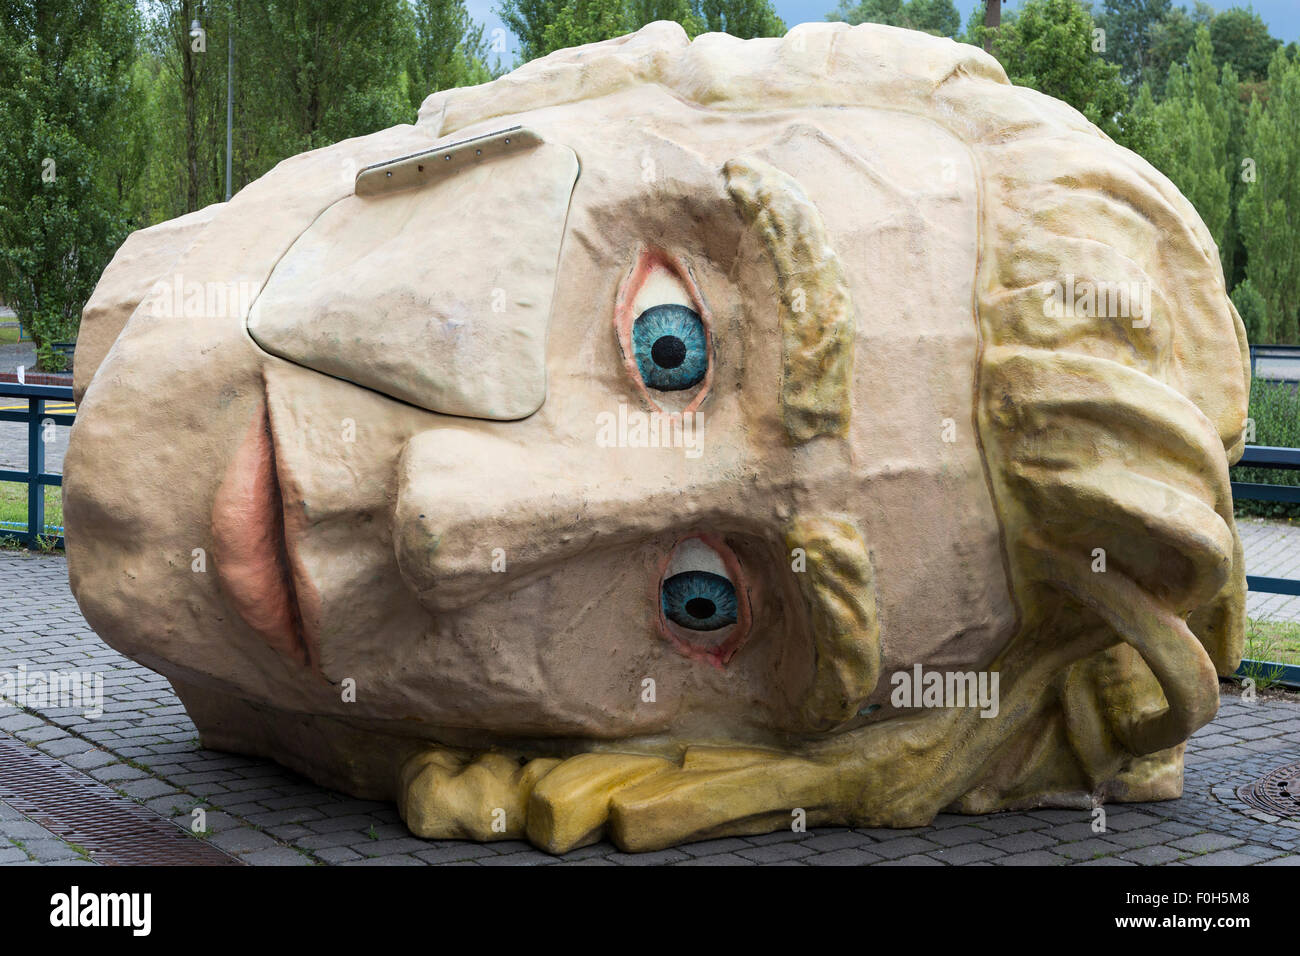 Bochum, Germany. 15 August 2015. The Head Hermann, 2005, by Atelier van  Lieshout. "The Good, the Bad and the Ugly", art installations by Atelier  van Lieshout at the Ruhrtriennale arts festival, Jahrhunderthalle